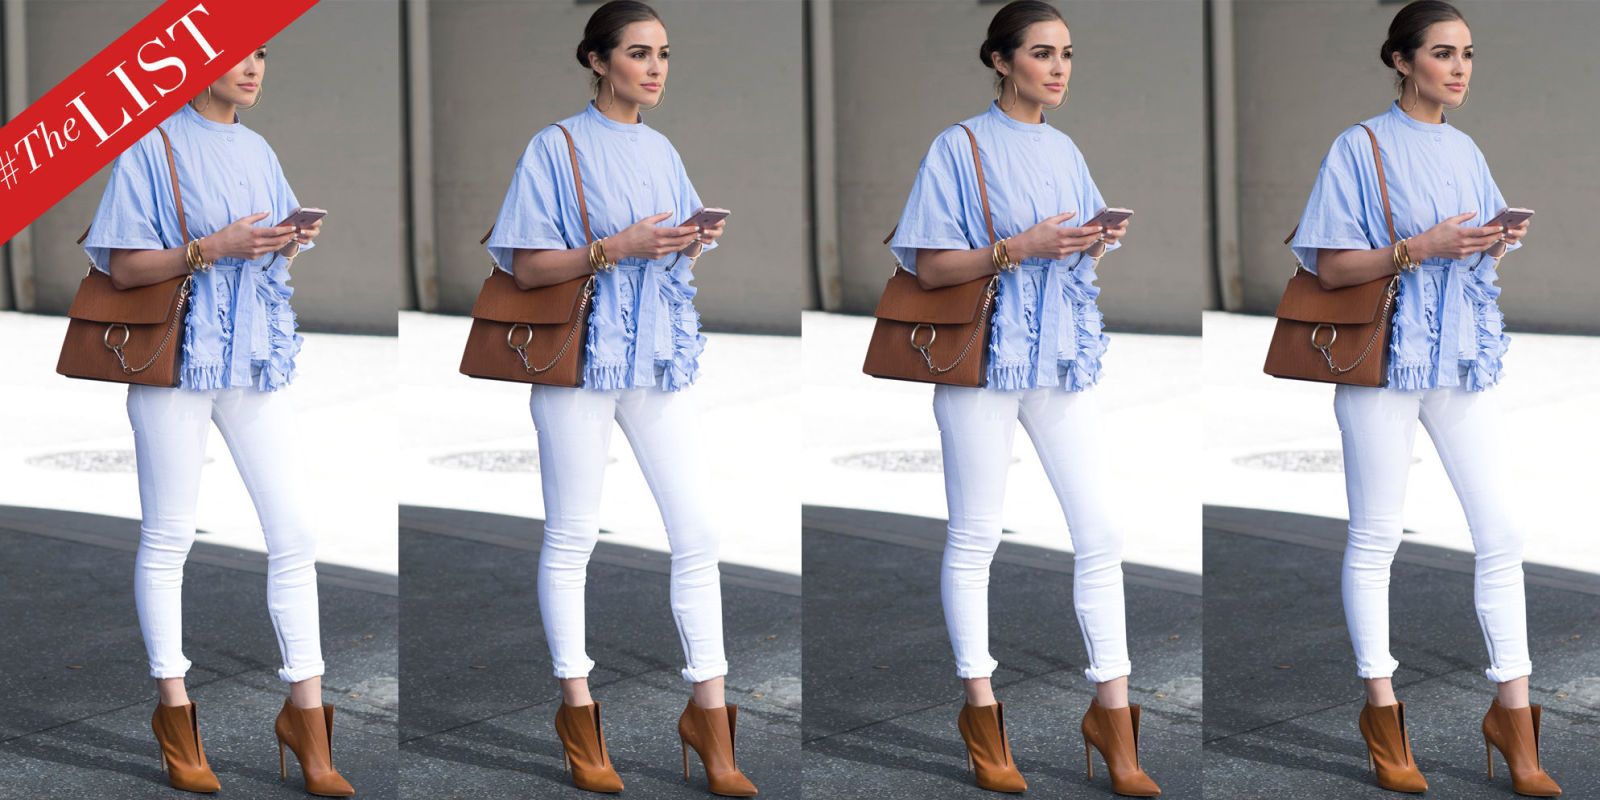 styling blue jeans